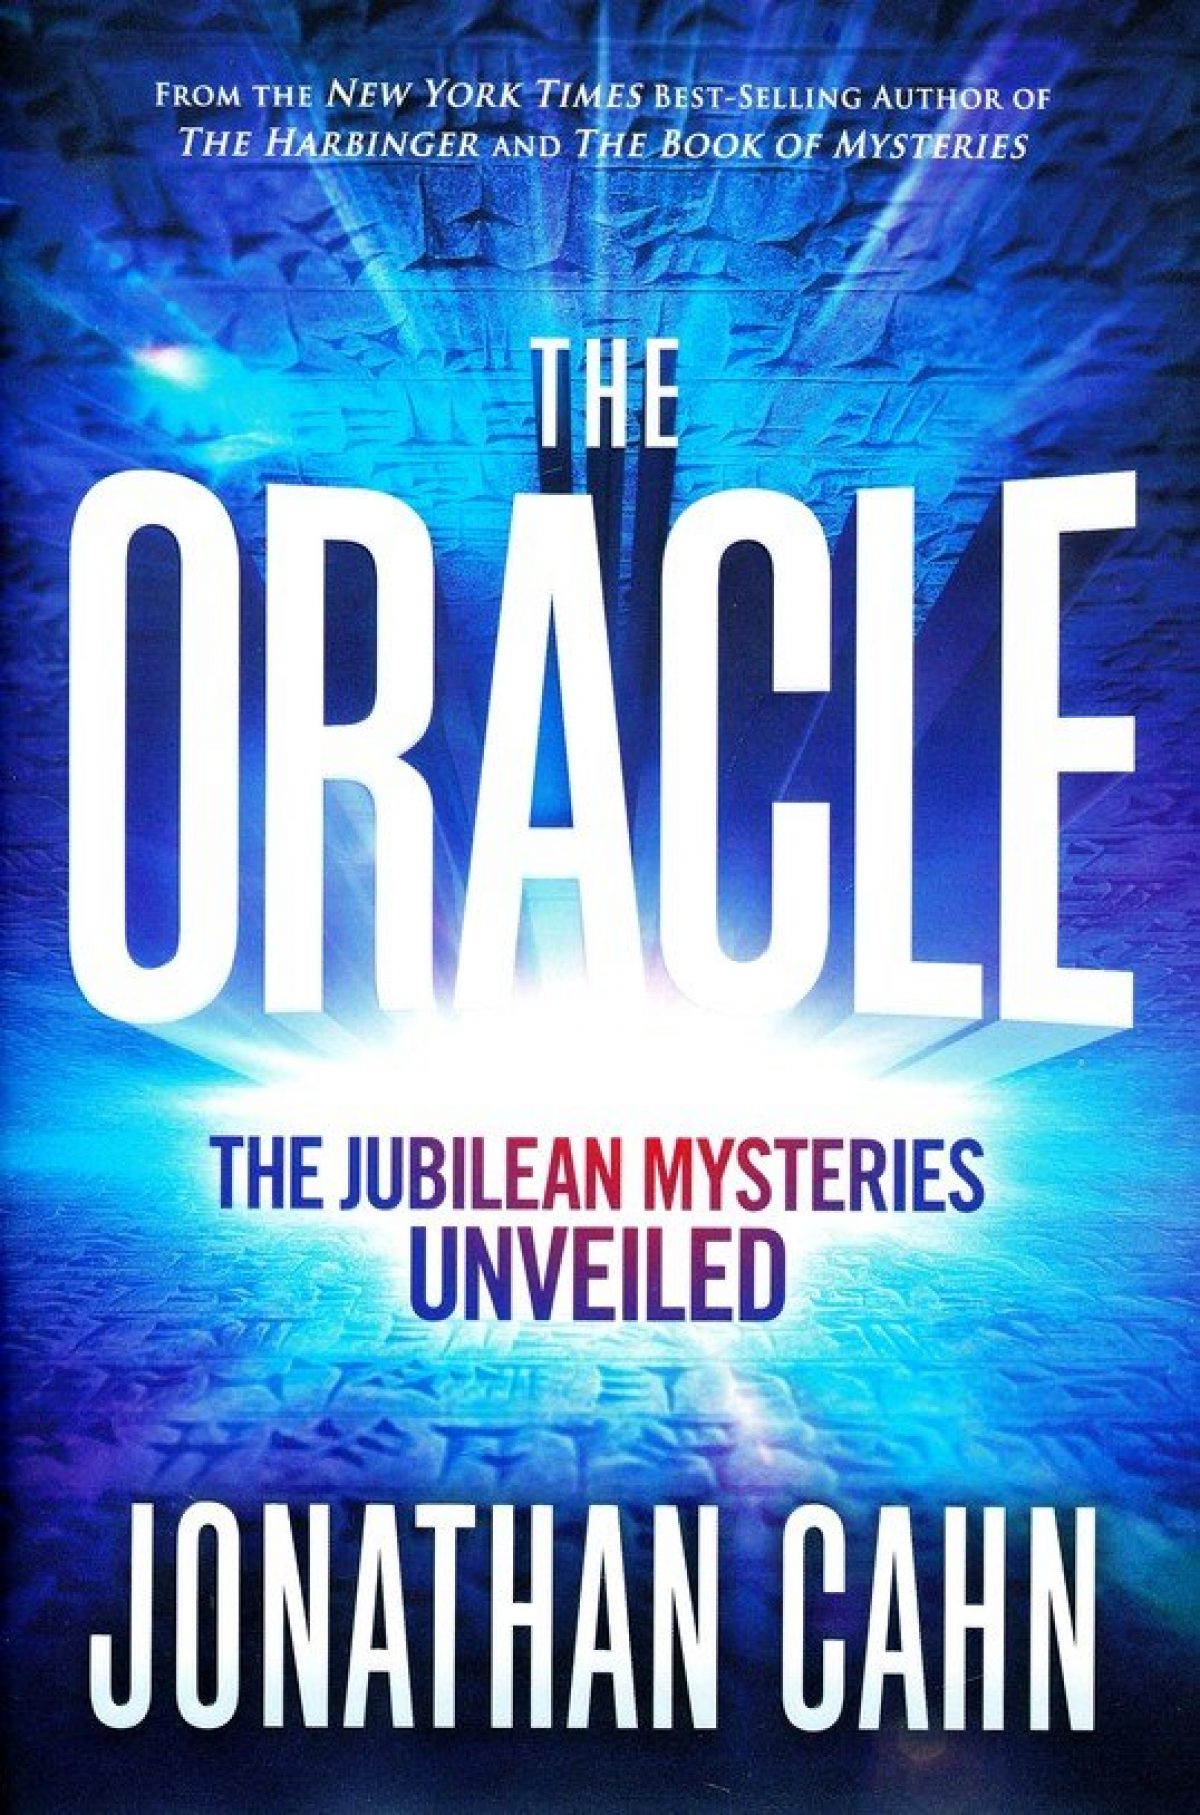 the oracle the jubilean mysteries unveiled